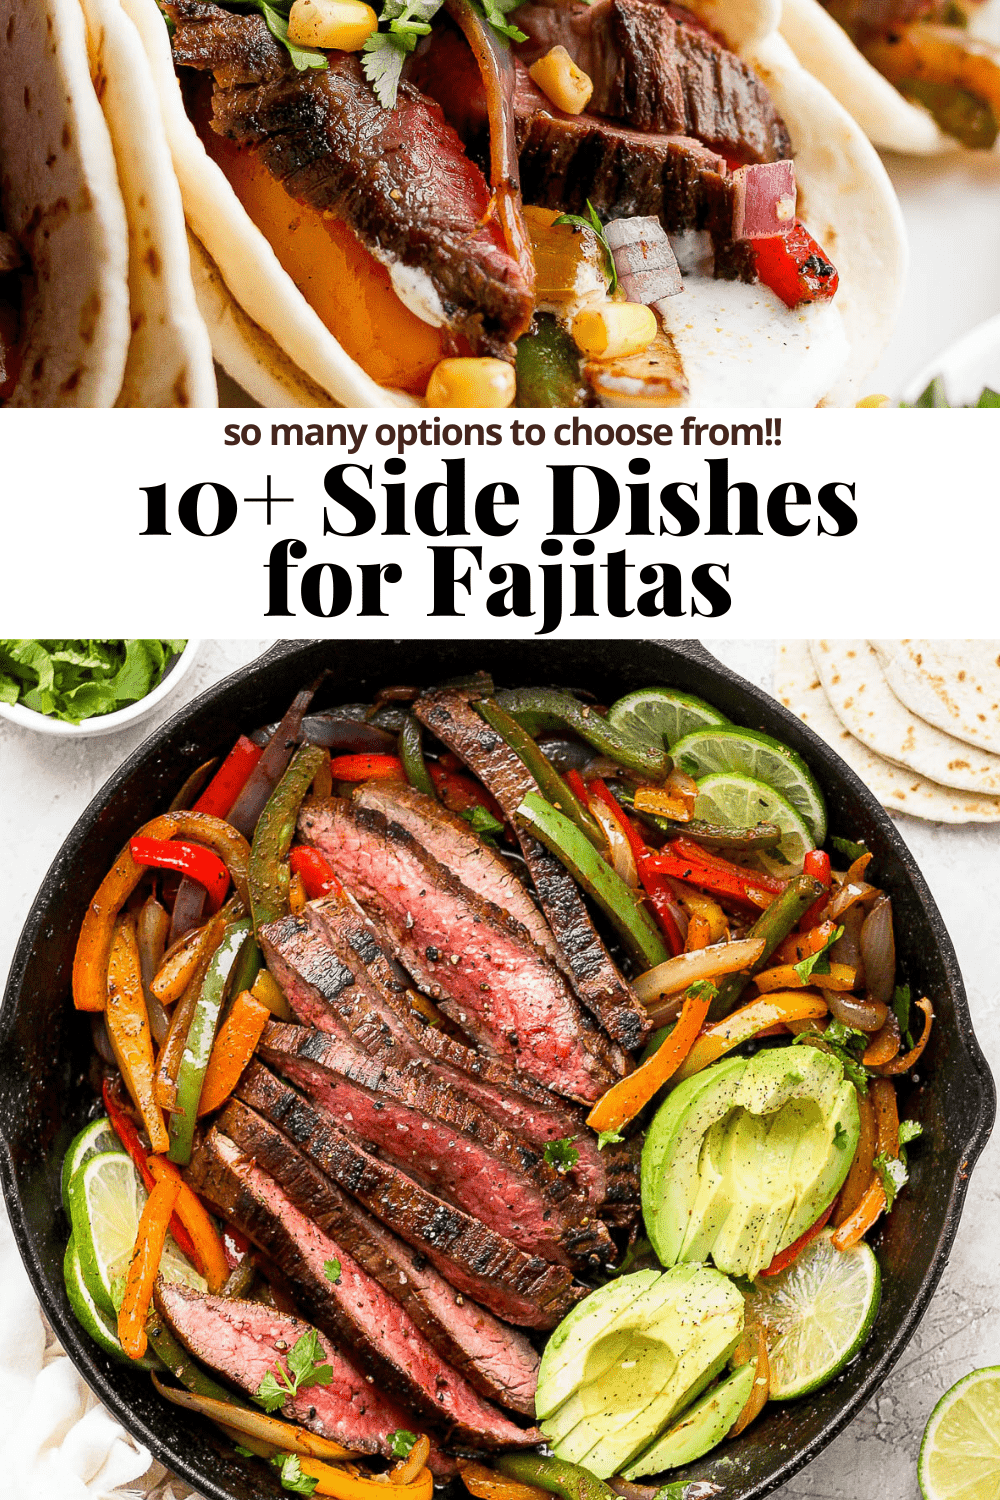 A pinterest pin with a cast iron skillet filled with steak fajitas and a steak fajita on a plate with text overlay that says "10+ side dishes for fajitas."